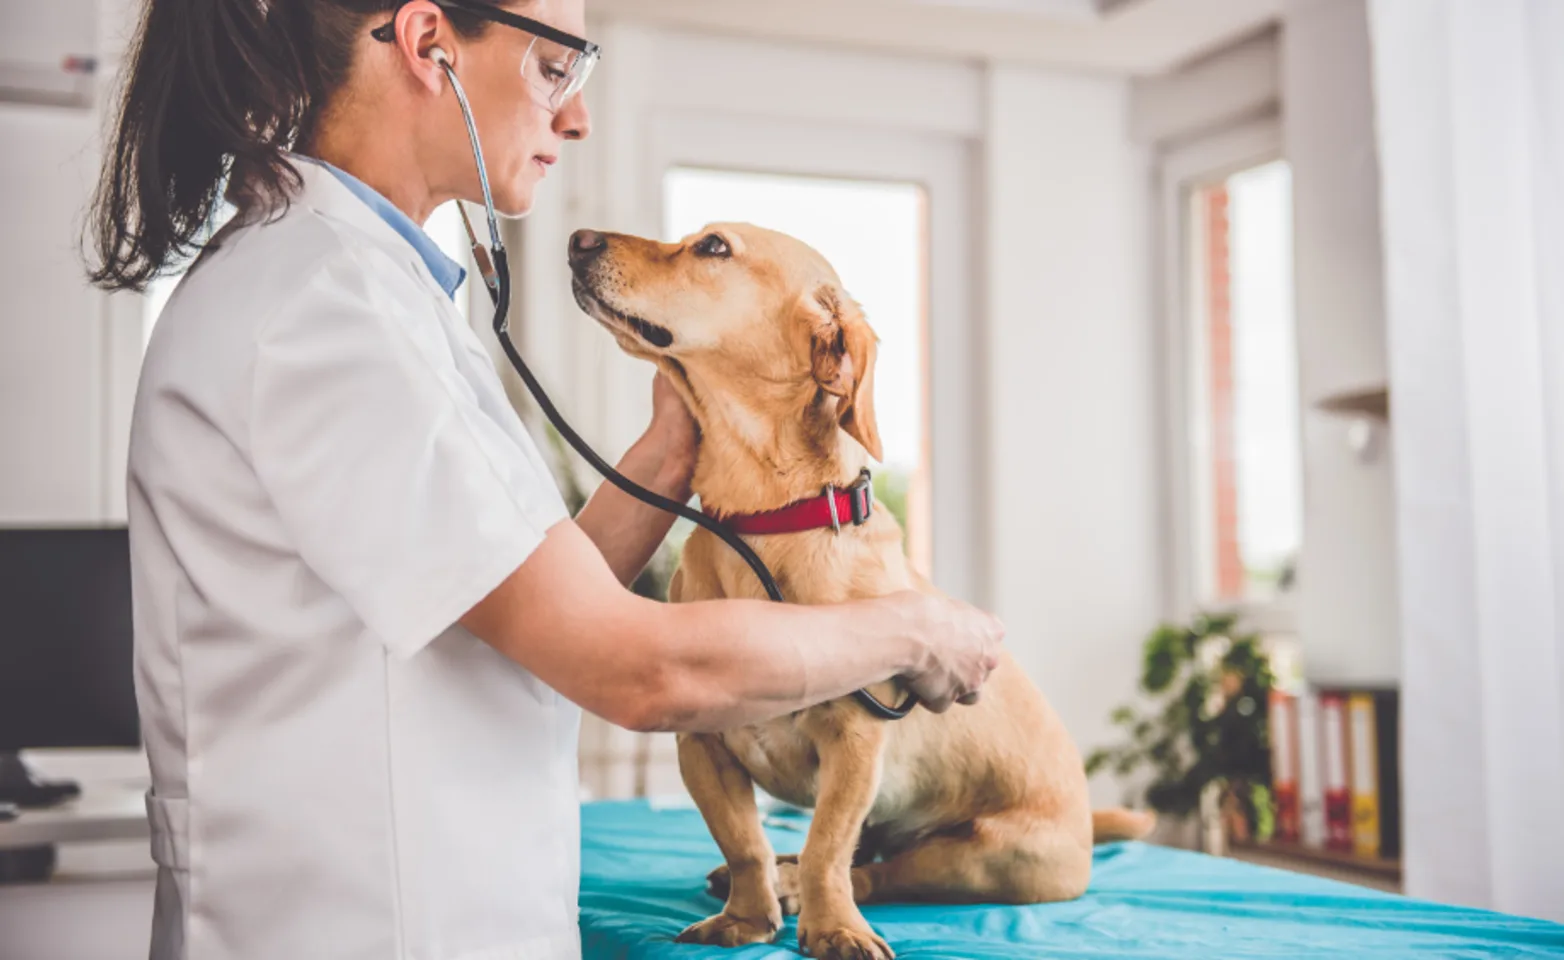 Veterinarian Examining a Dog with Her Stethoscope